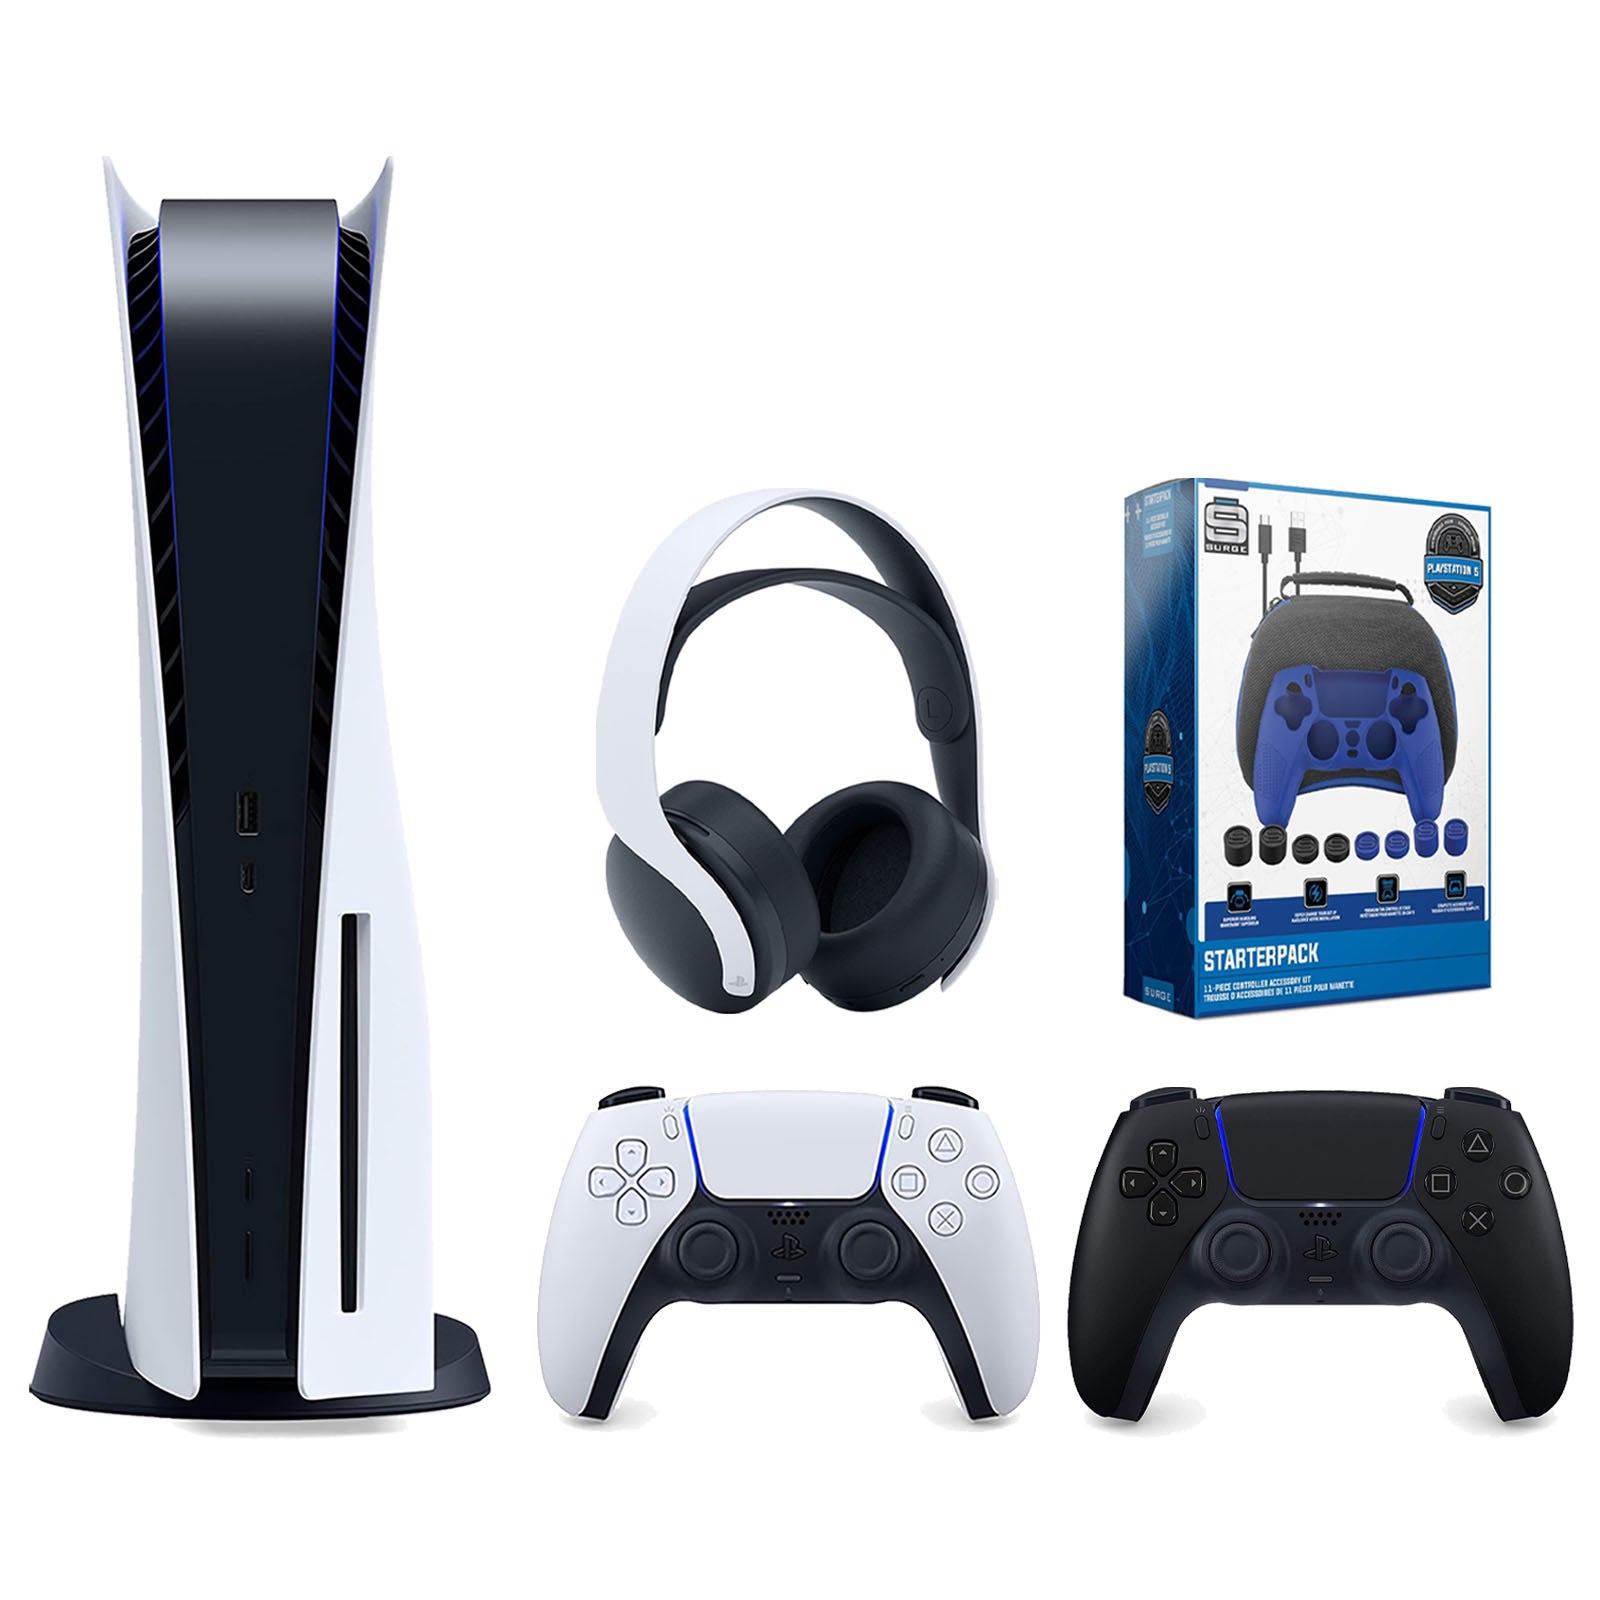 Sony Playstation 5 Disc Version Console with Extra Black Controller, White PULSE 3D Headset and Surge Pro Gamer Starter Pack 11-Piece Accessory Bundle - Pro-Distributing